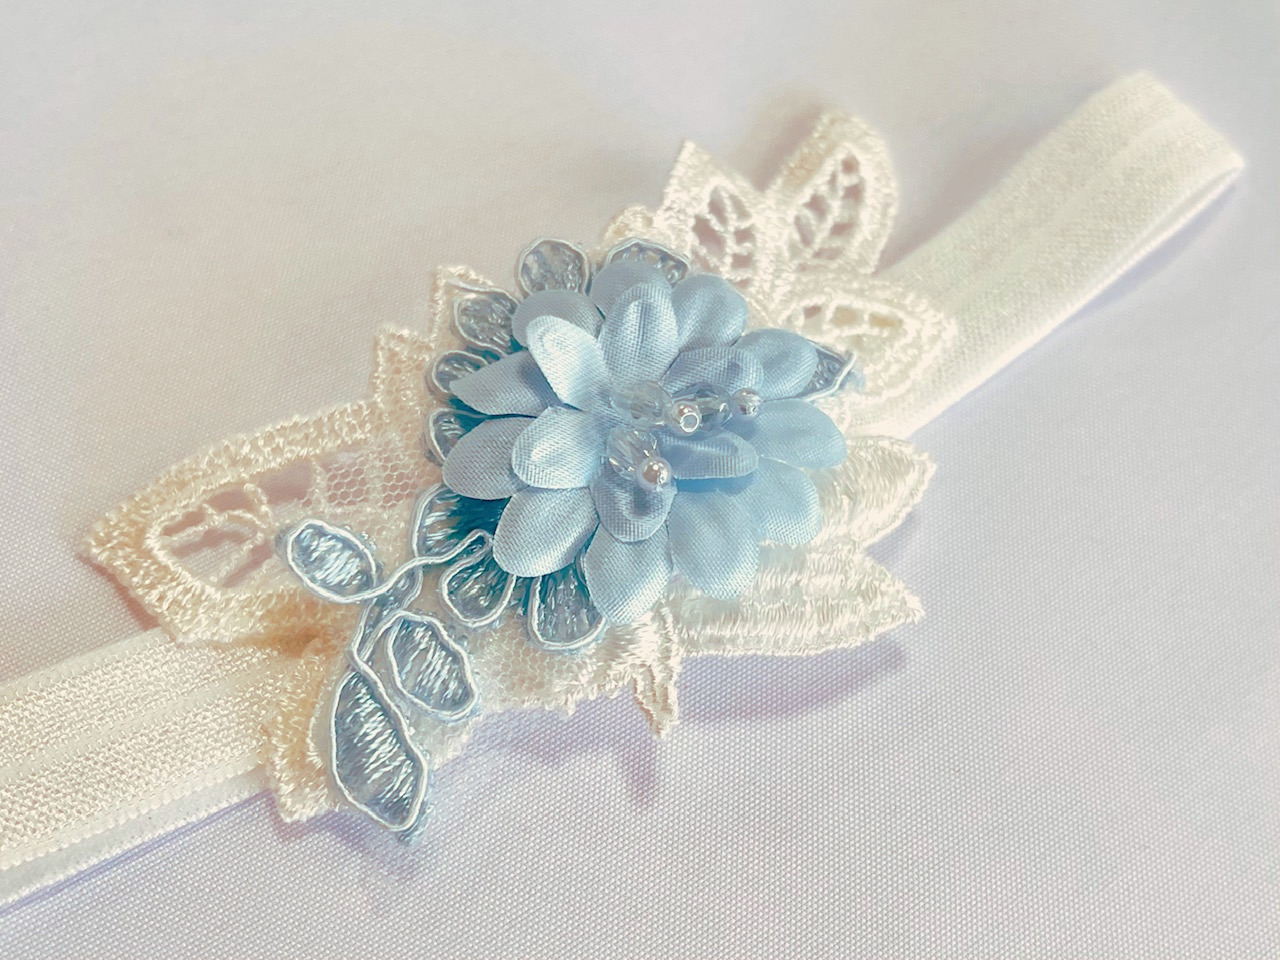 Ivory Venise Lace Garter w/Something Blue accents